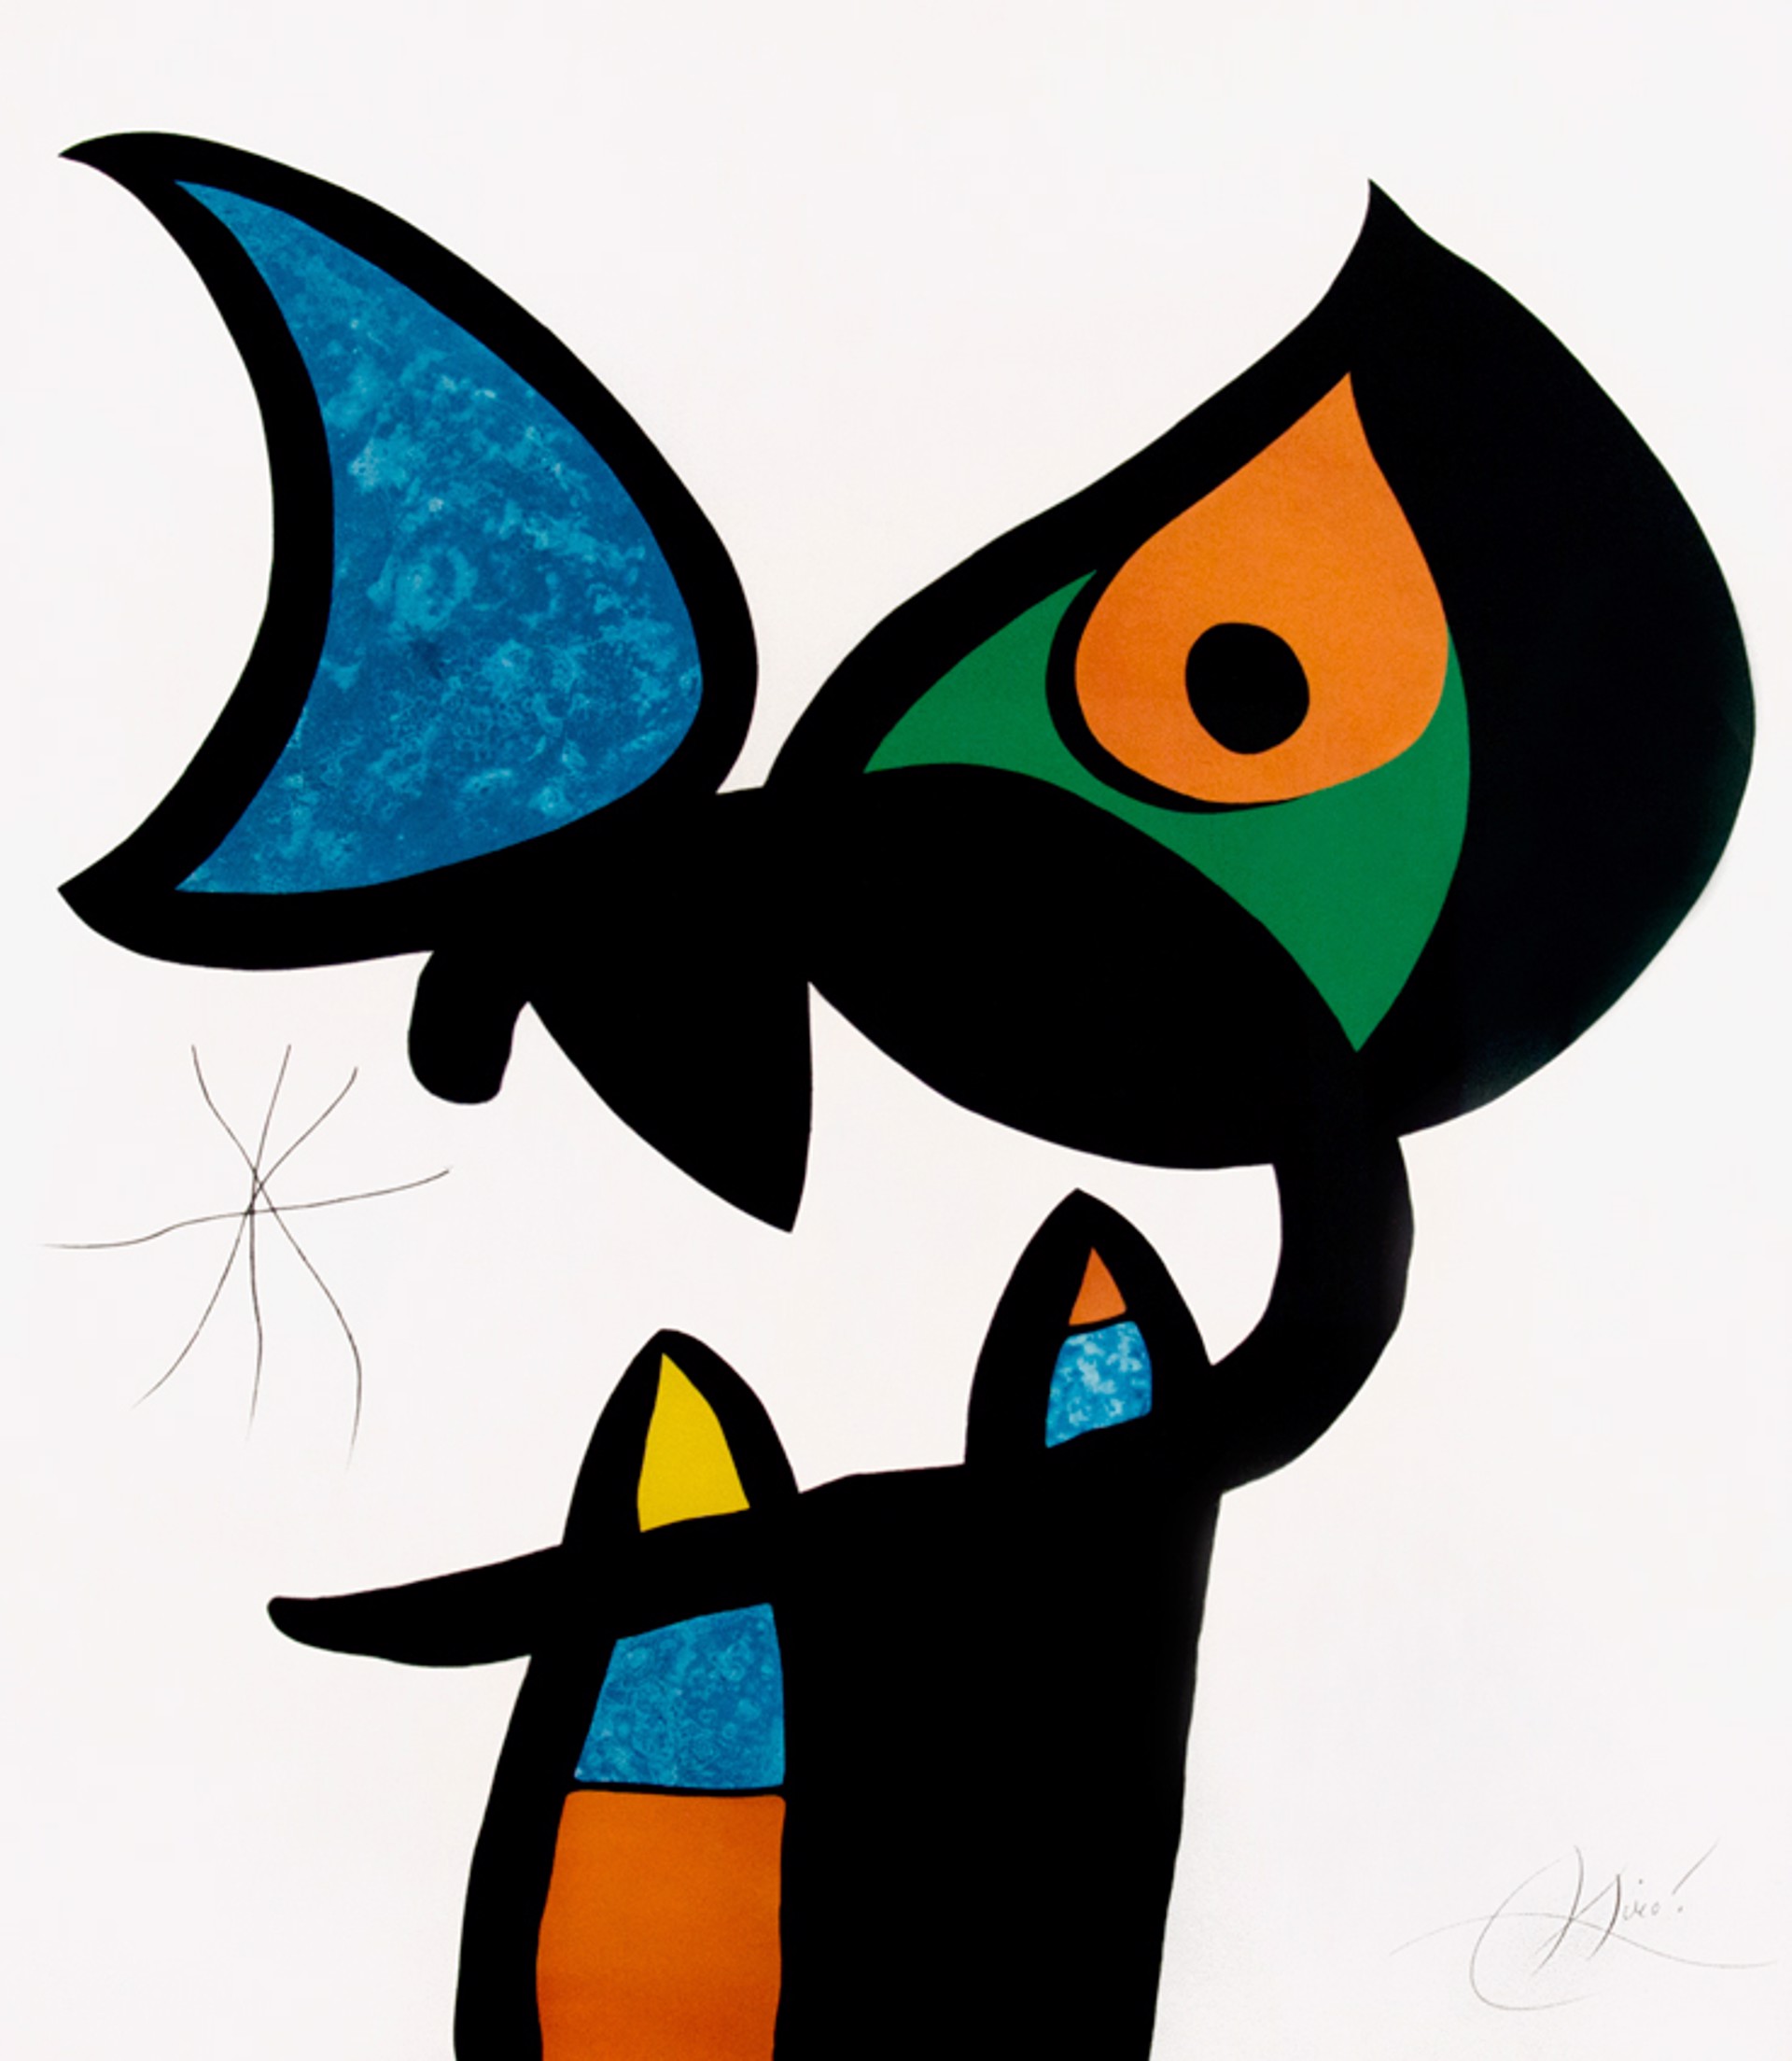 Plate VI from Espriu by Joan Miro (1893 - 1983)